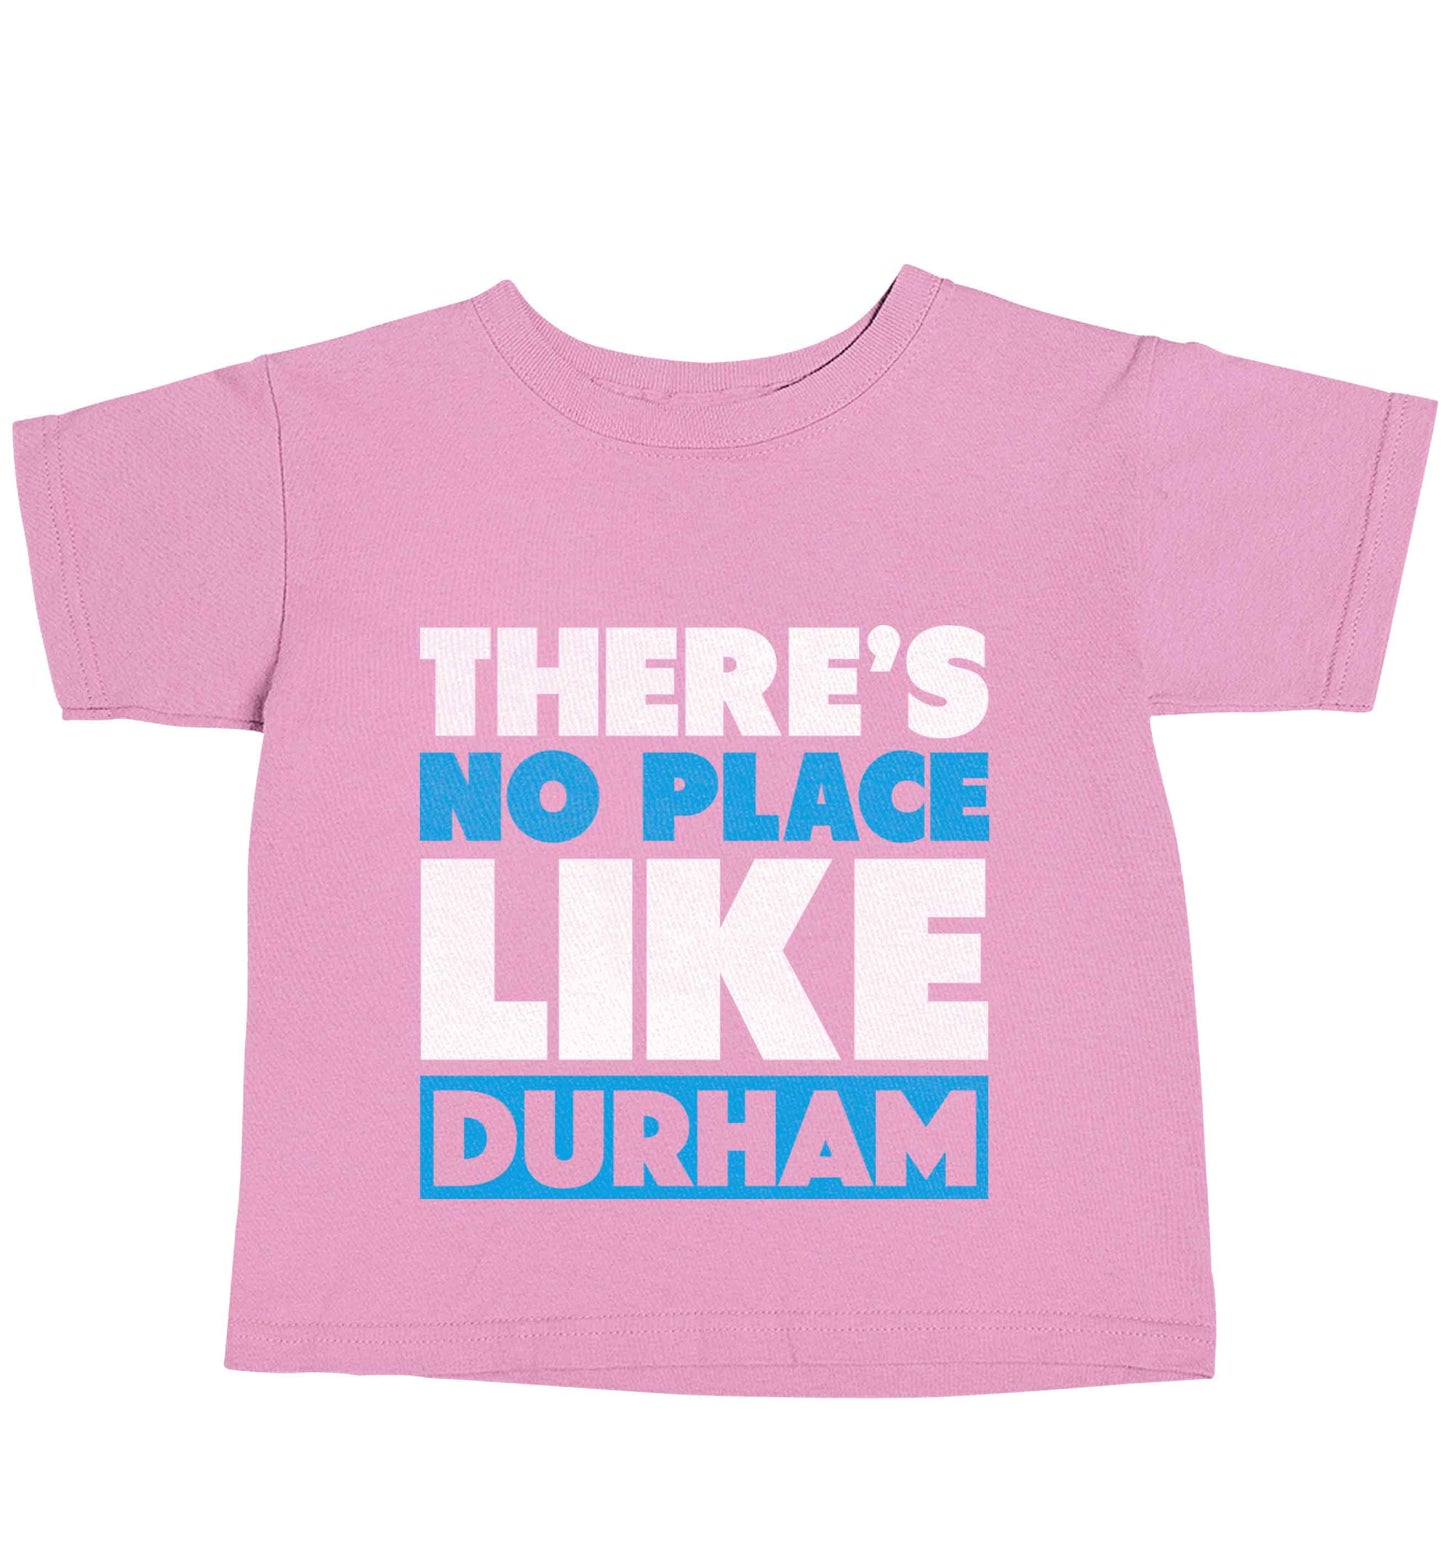 There's no place like Durham light pink baby toddler Tshirt 2 Years